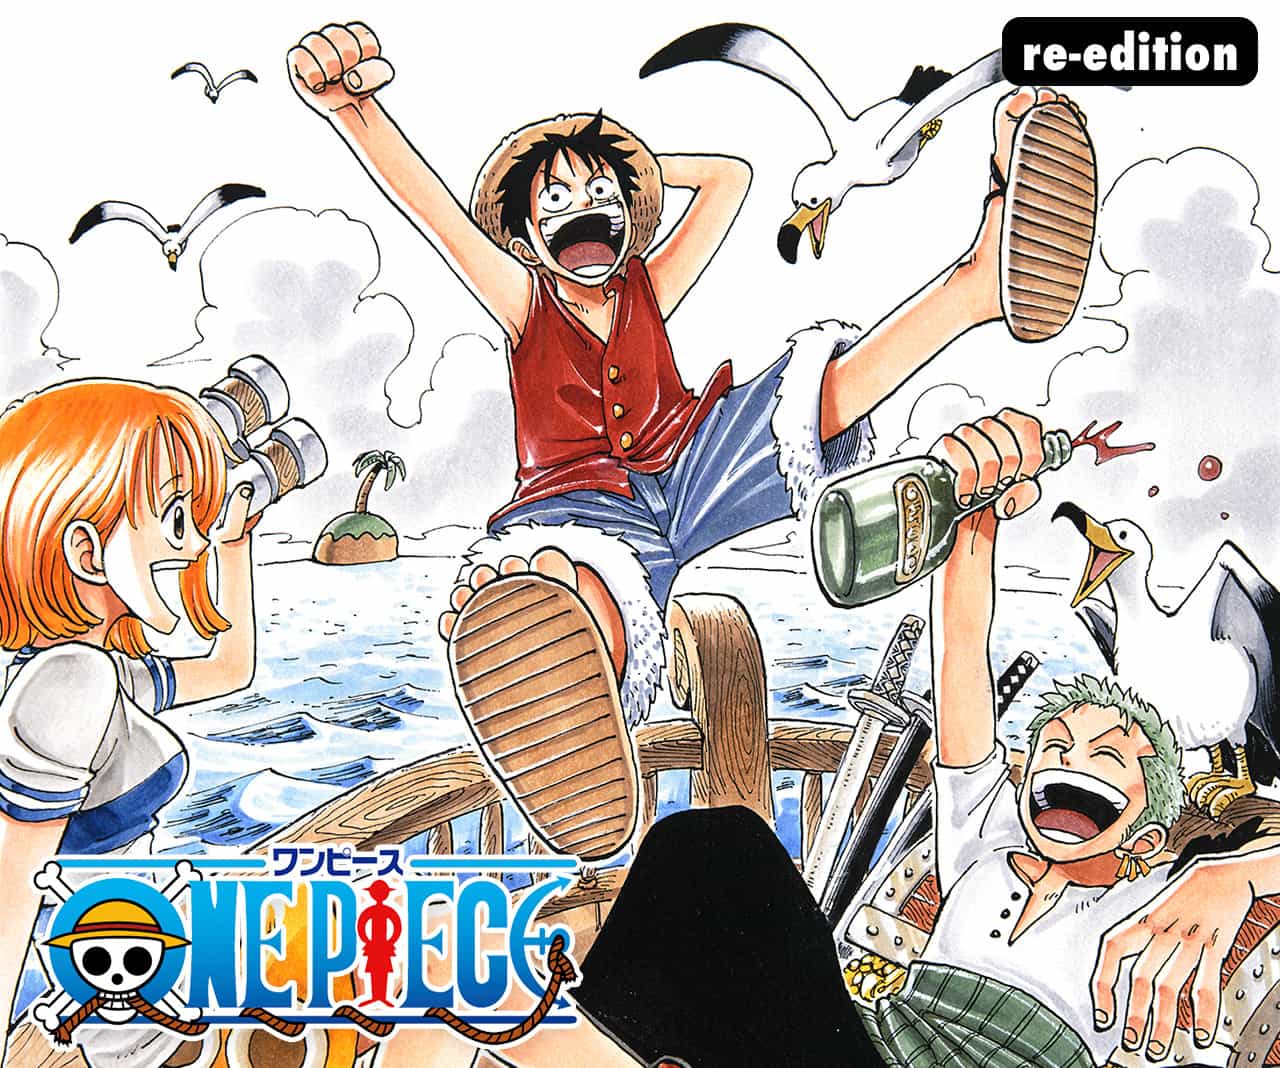 One Piece re-edition